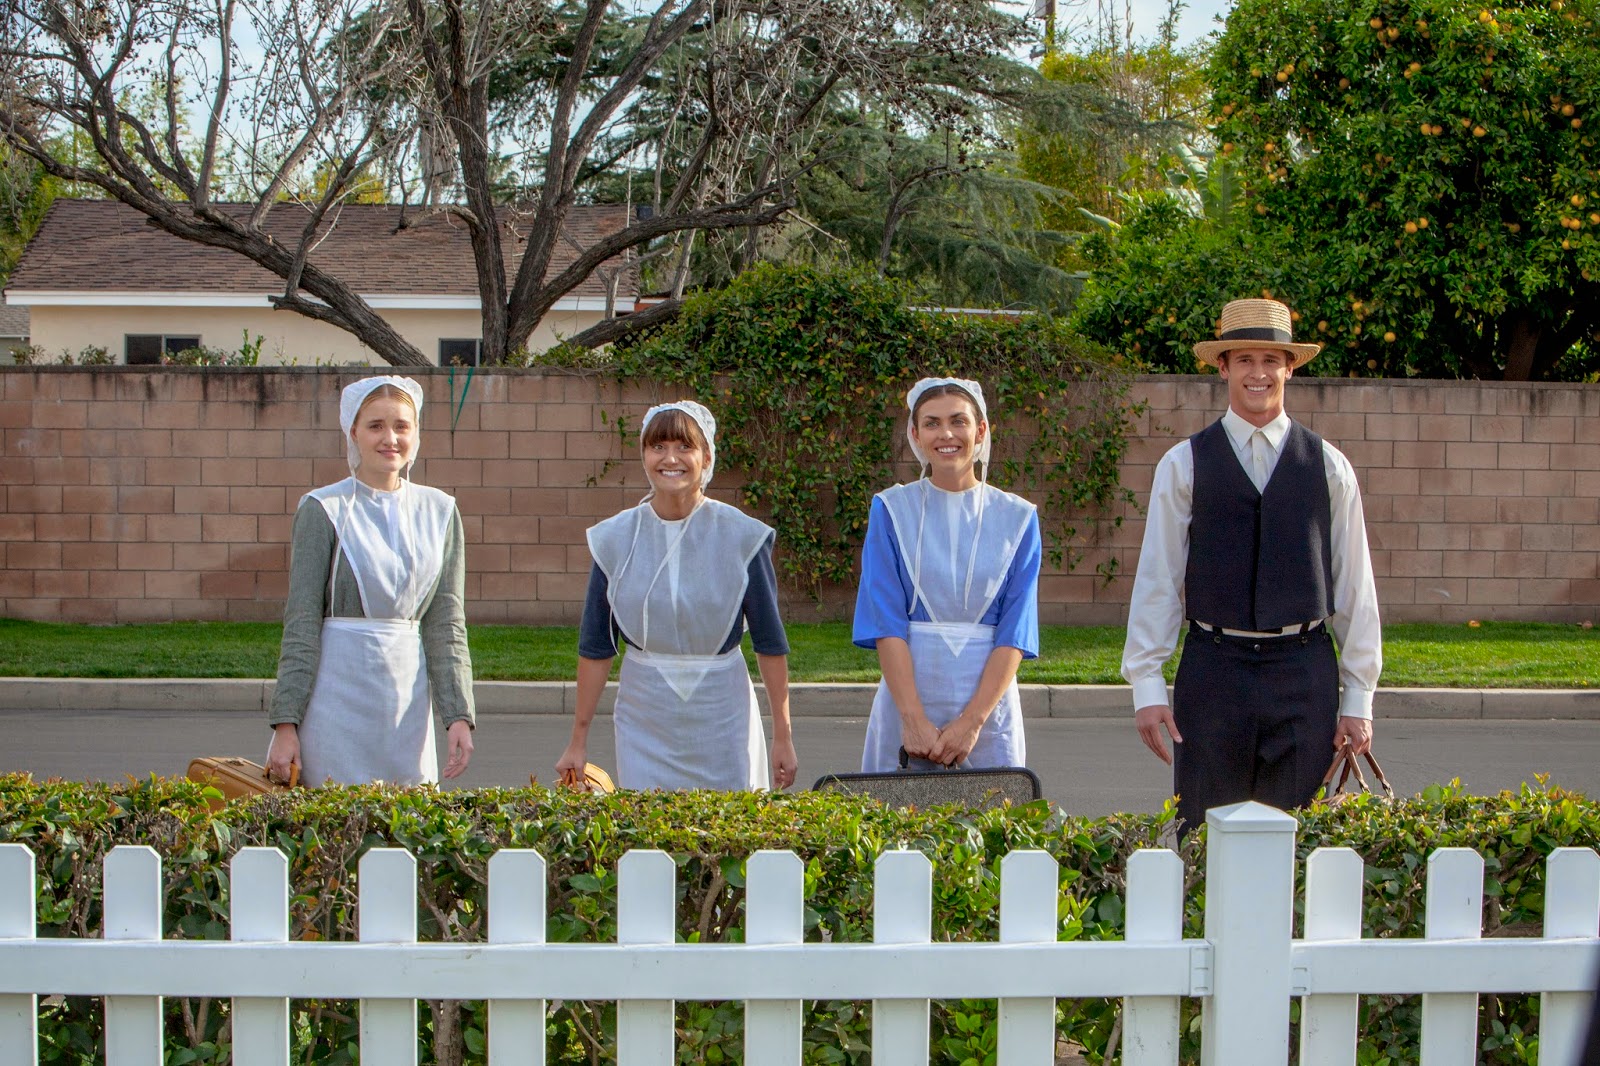 The amish of Expecting Amish